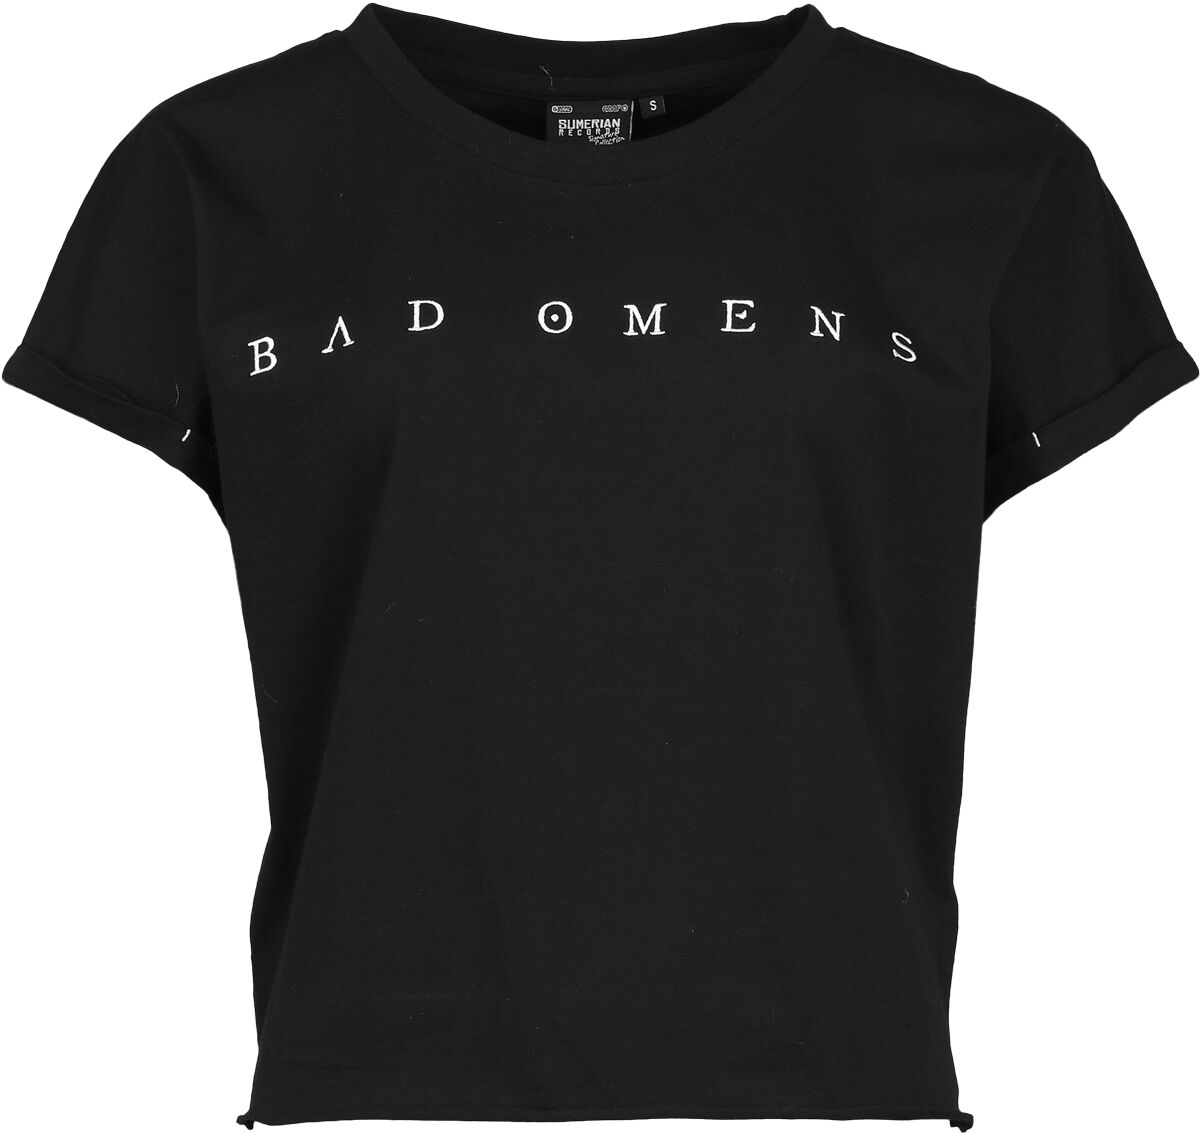 Image of T-Shirt di Bad Omens - EMP Signature Collection - M a 3XL - Donna - nero